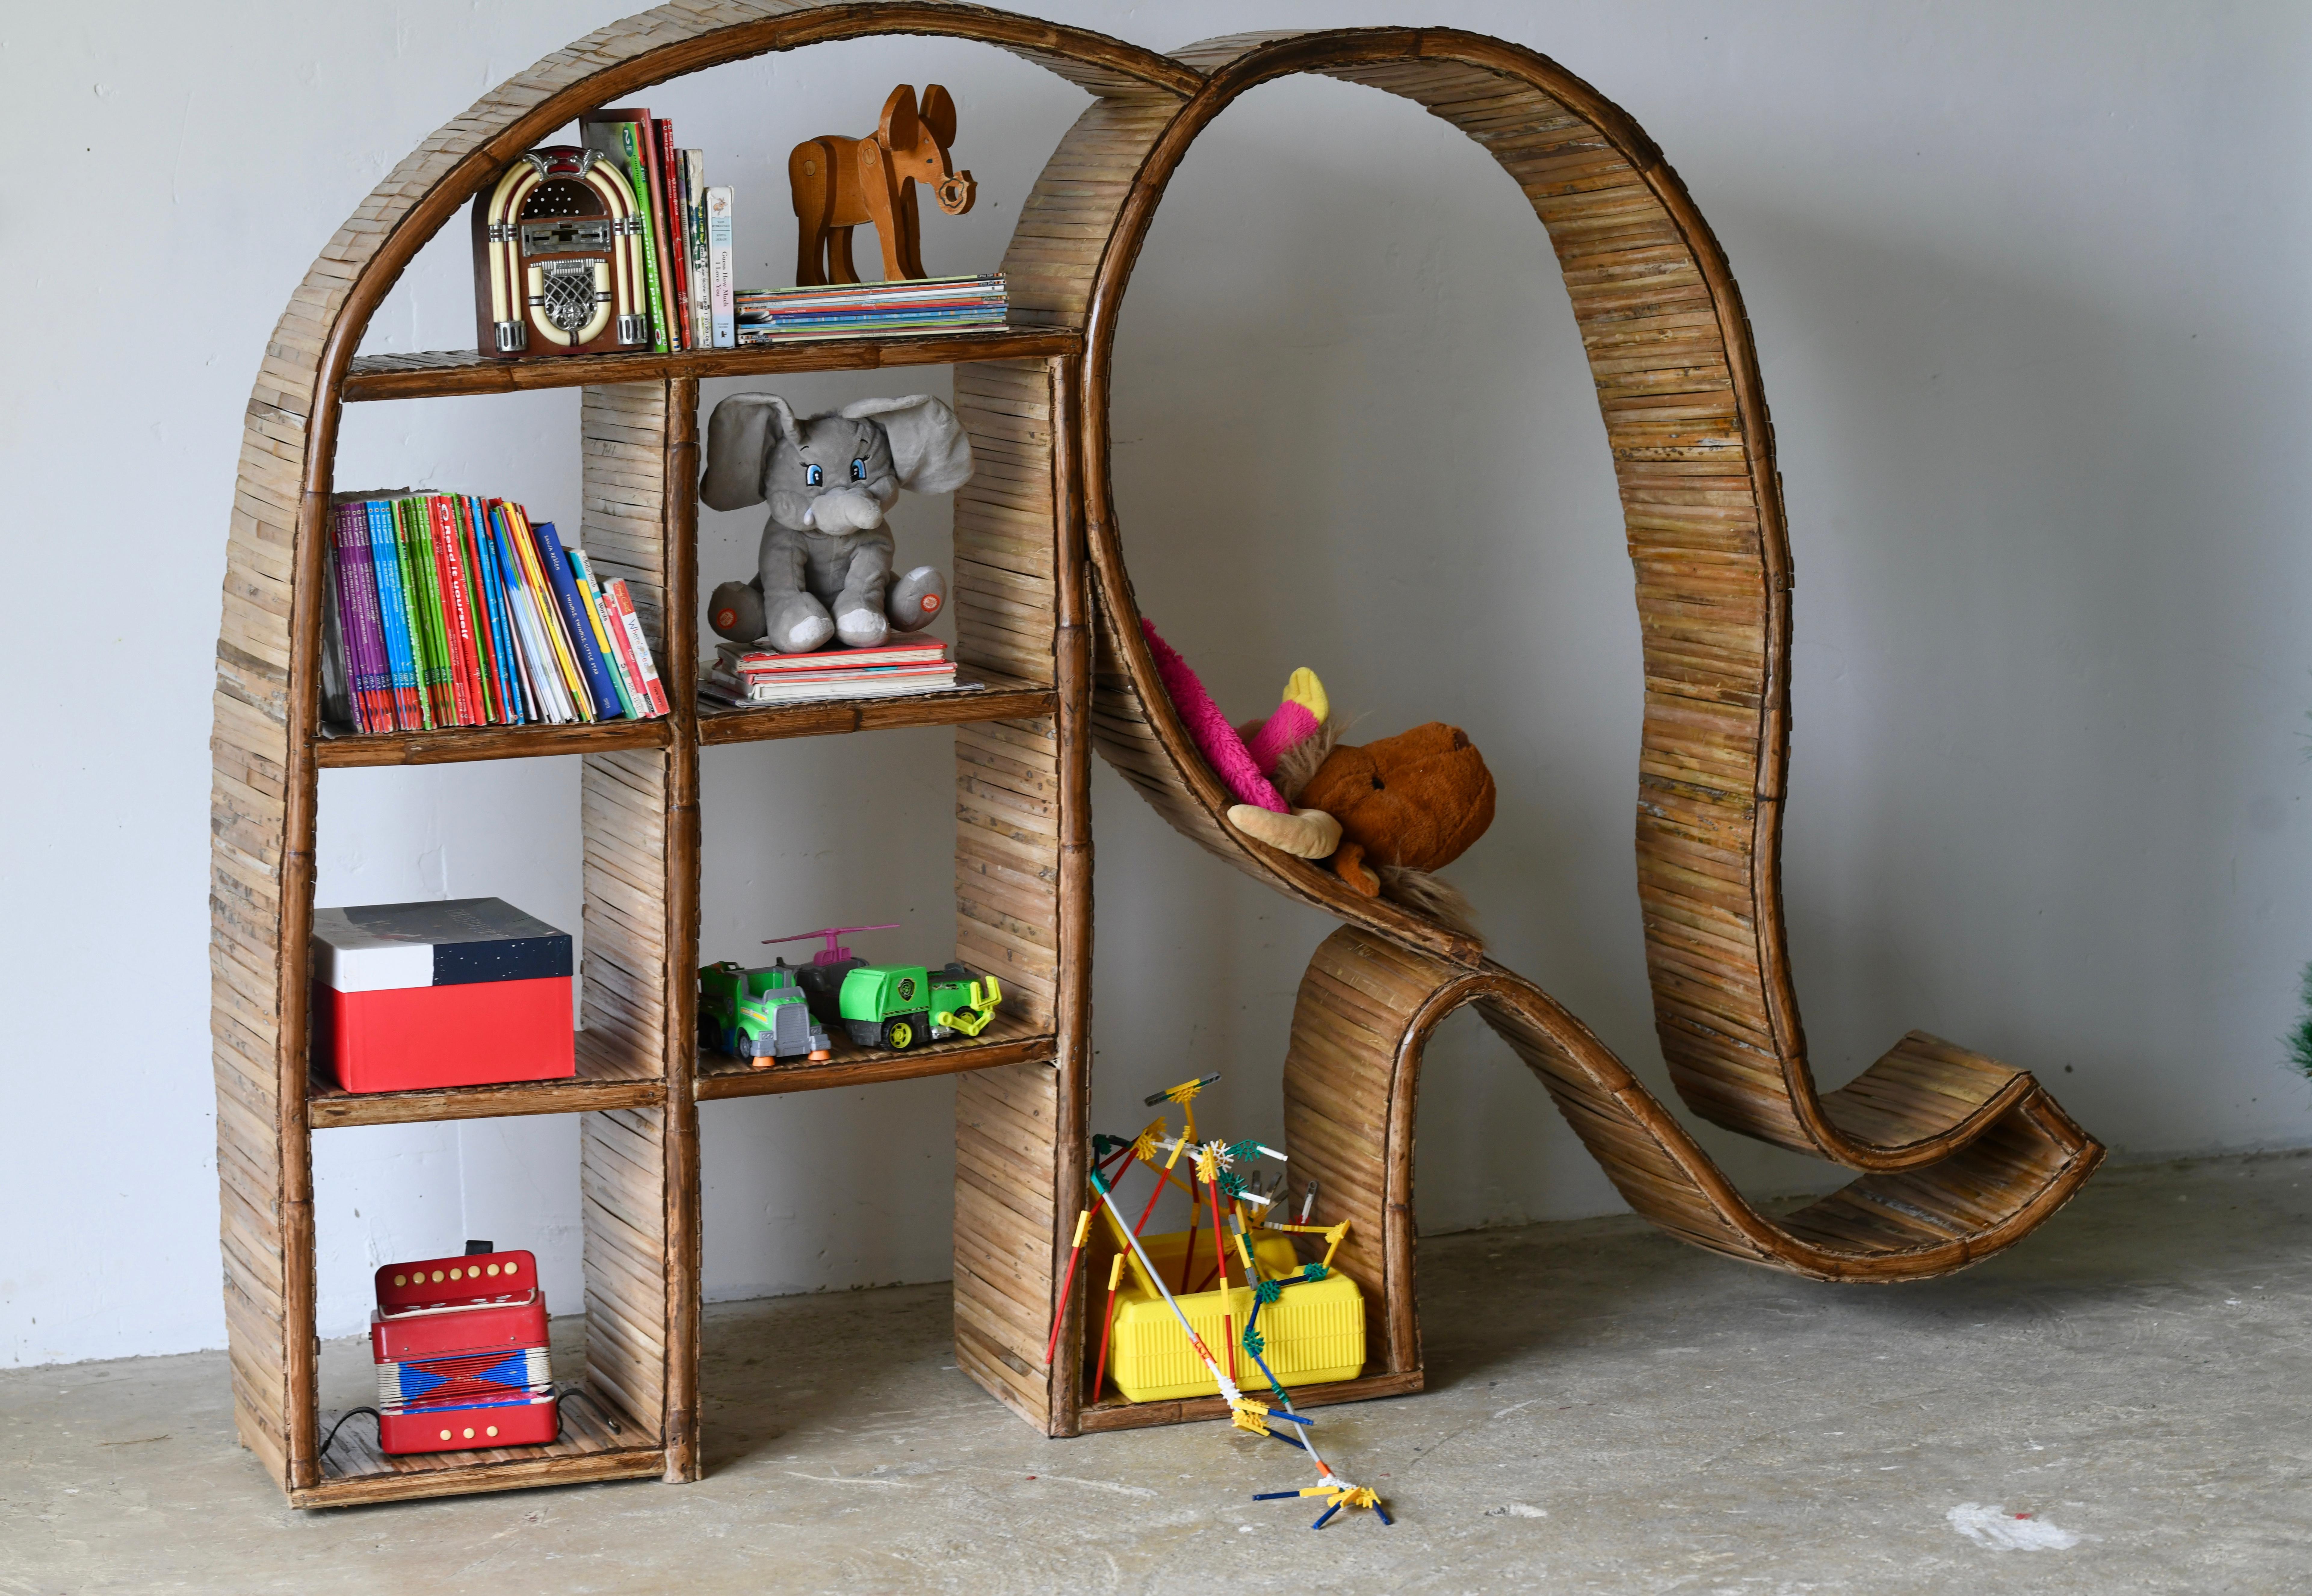 Theses organic bamboo shelving unit- bookcase, shaped like an elephant fabulous sculptural piece comprising of 8 shelves made from an organic rattan frame along with bamboo strips making up the shelving. Fabulous fun mid century feel great for the